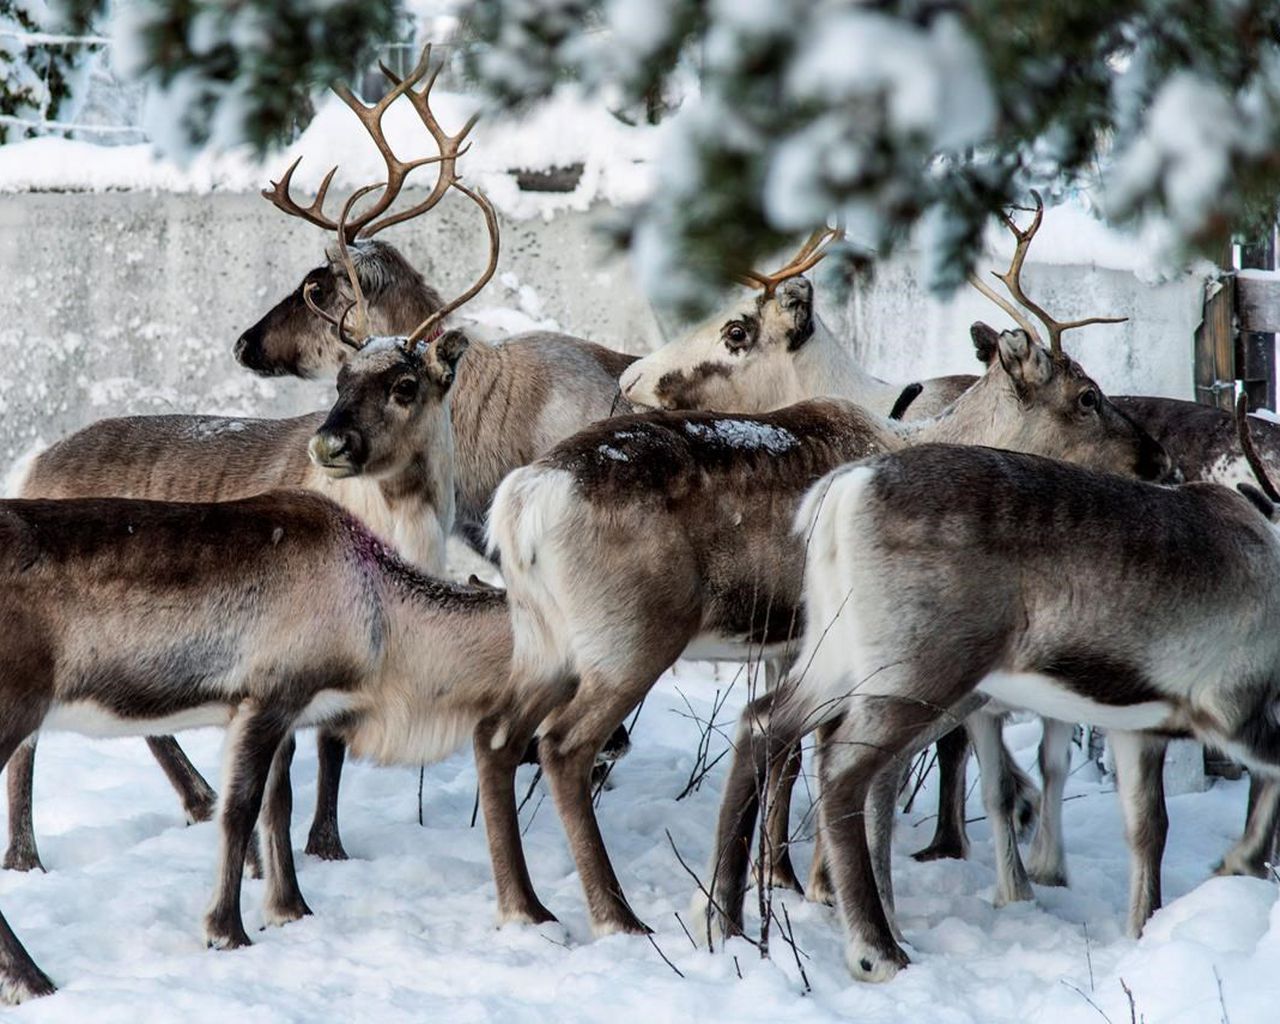 In Sweden's Arctic, ice atop snow leaves reindeer starving